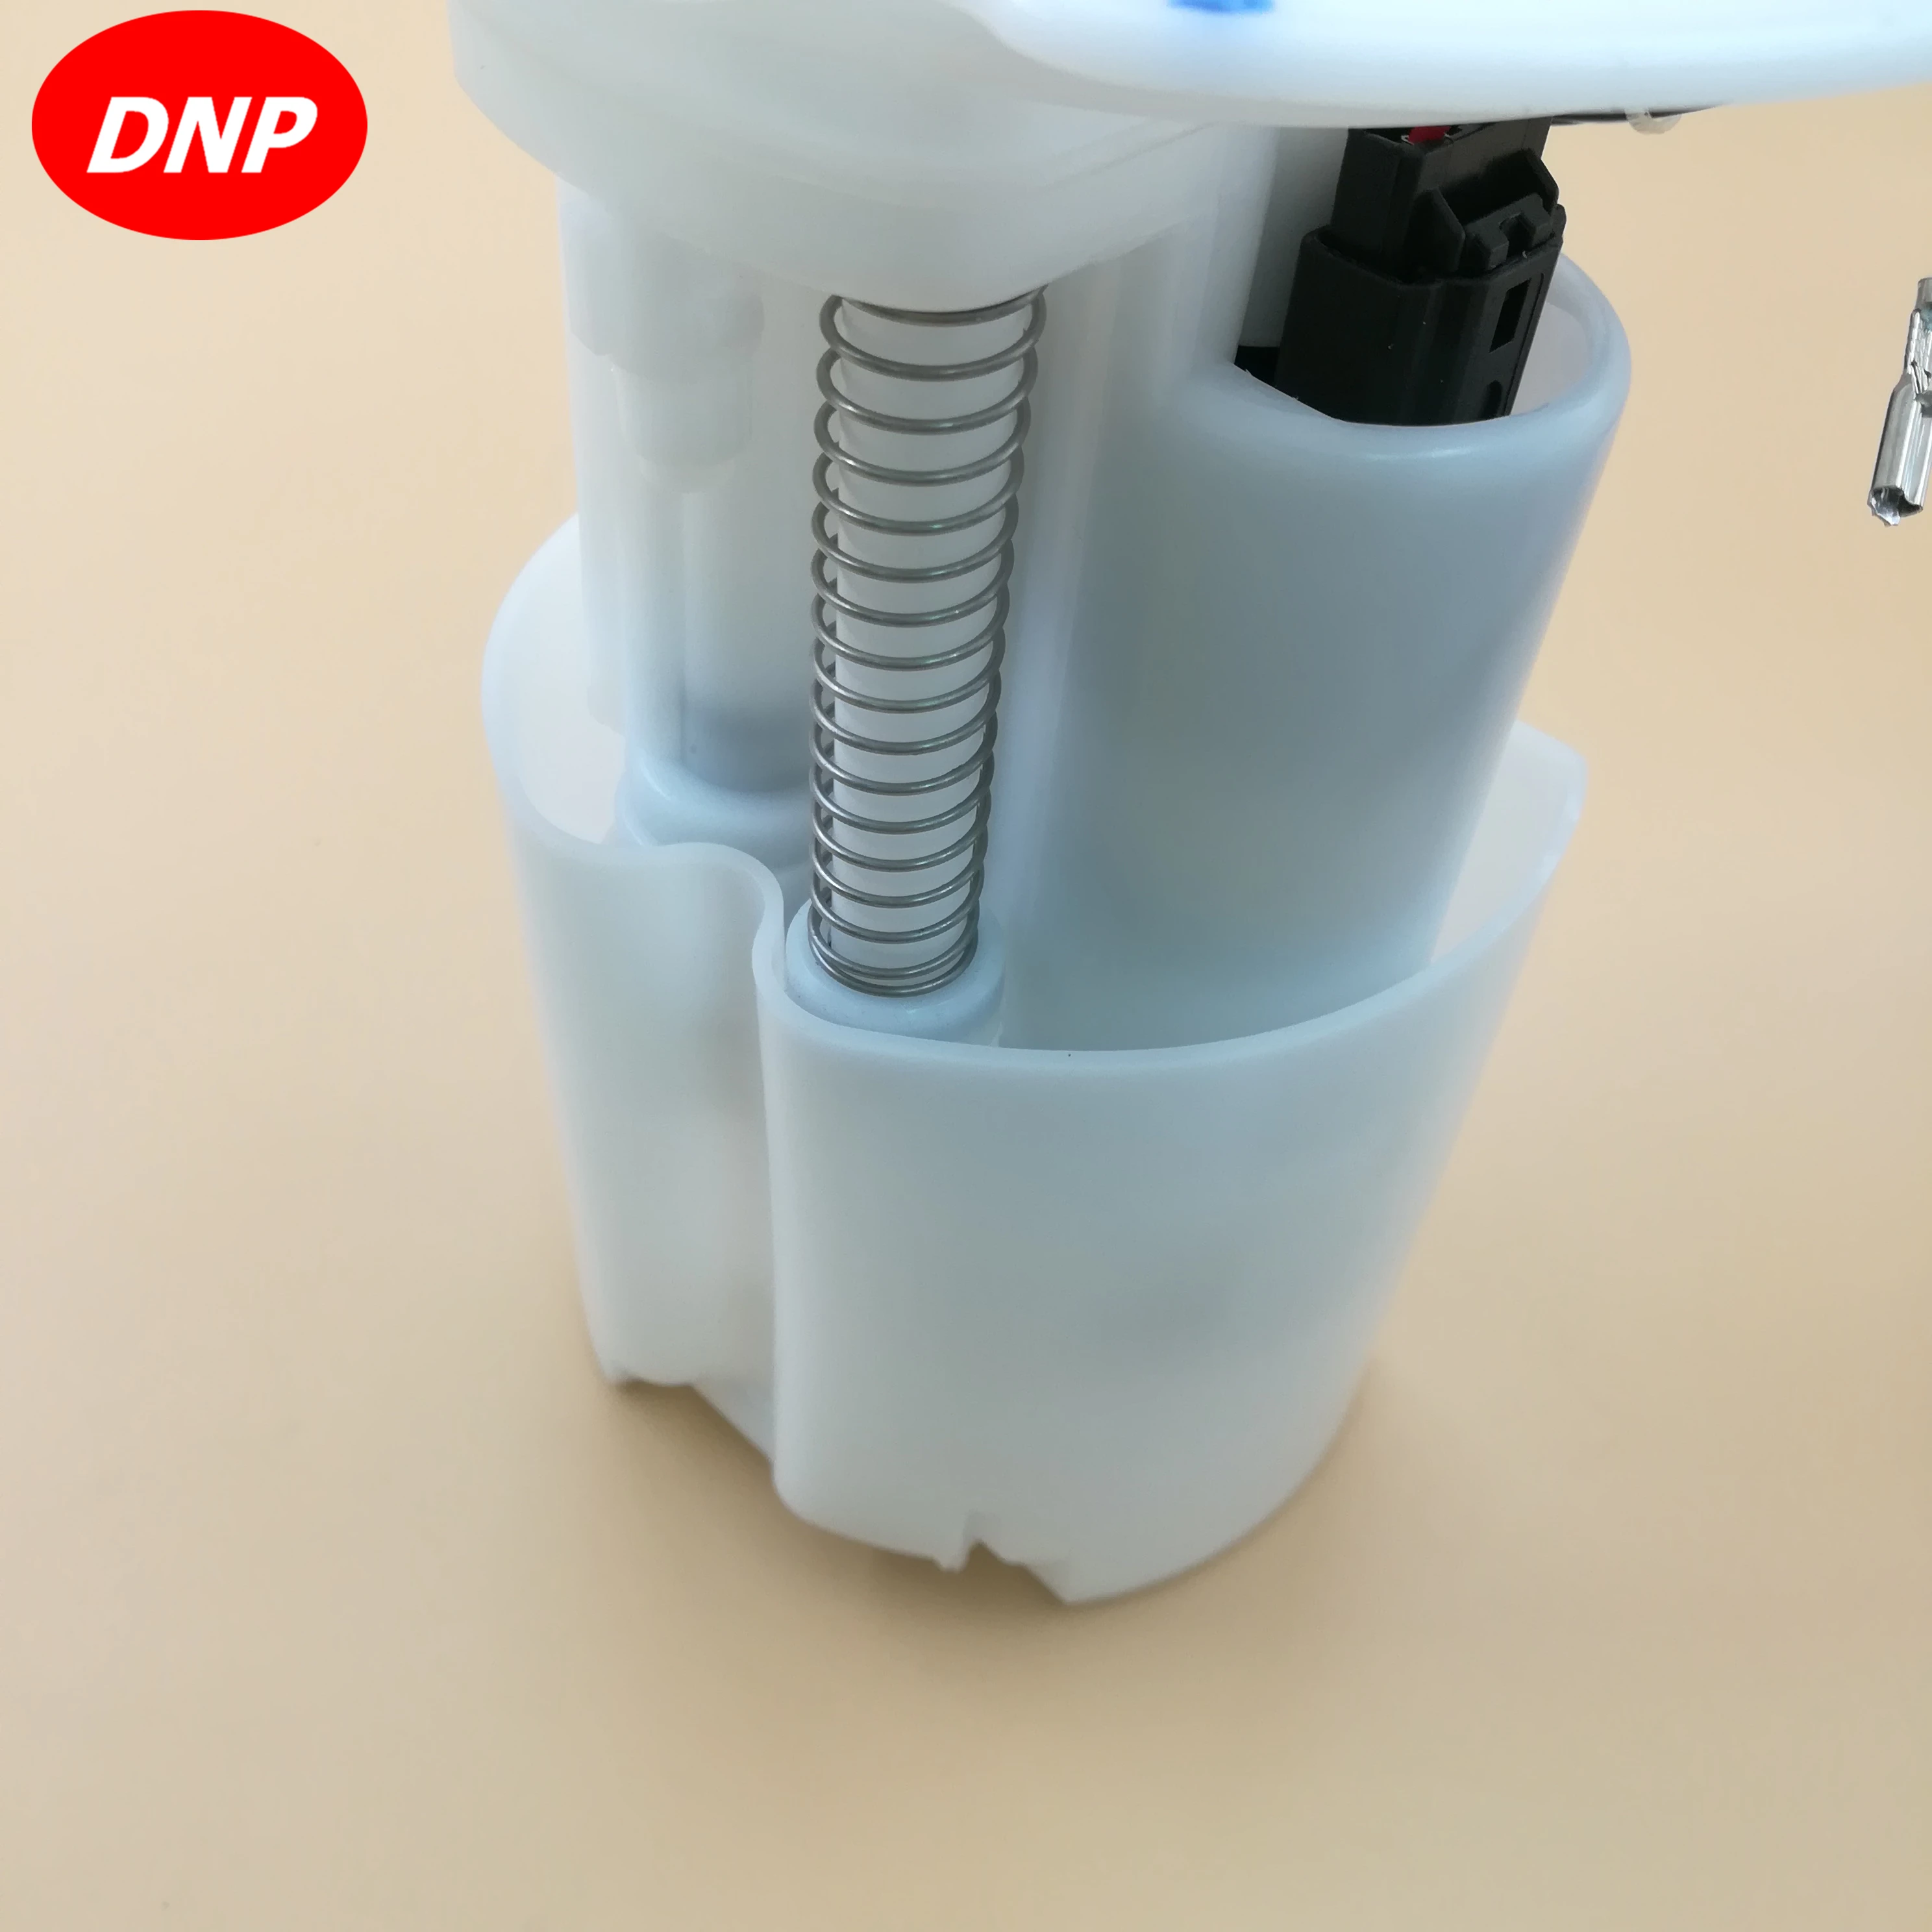 DNP Fuel Pump Module Assemblyd fit for Nissan Serena C25 2wd 2005-2007 17040-CY000